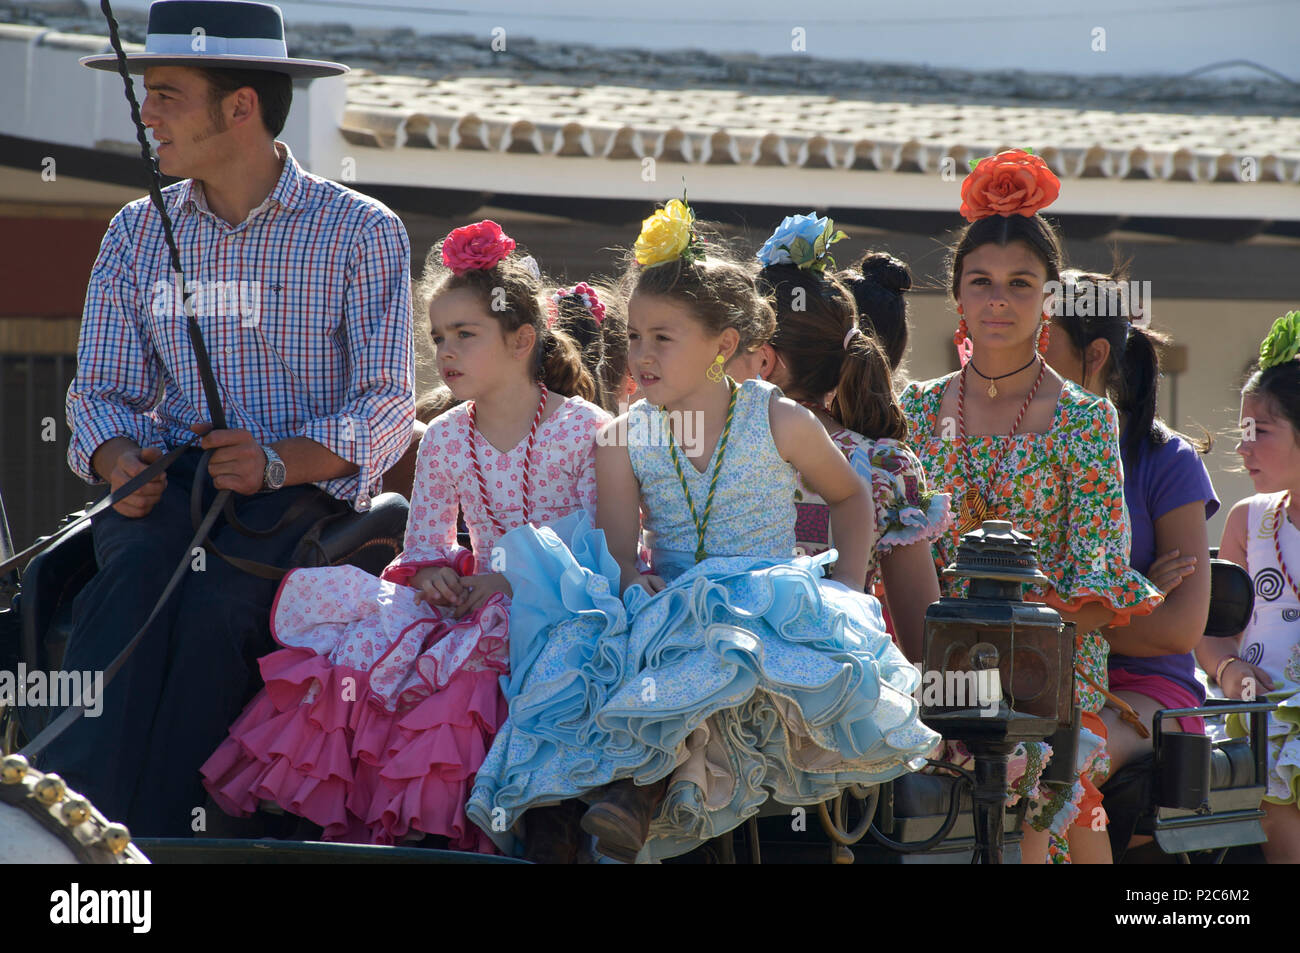 Girls and young woman in q horse carriage in Flamenco dresses, Pilgrims in front of the church at El Rocio at Pentecost, Huelva, Stock Photo